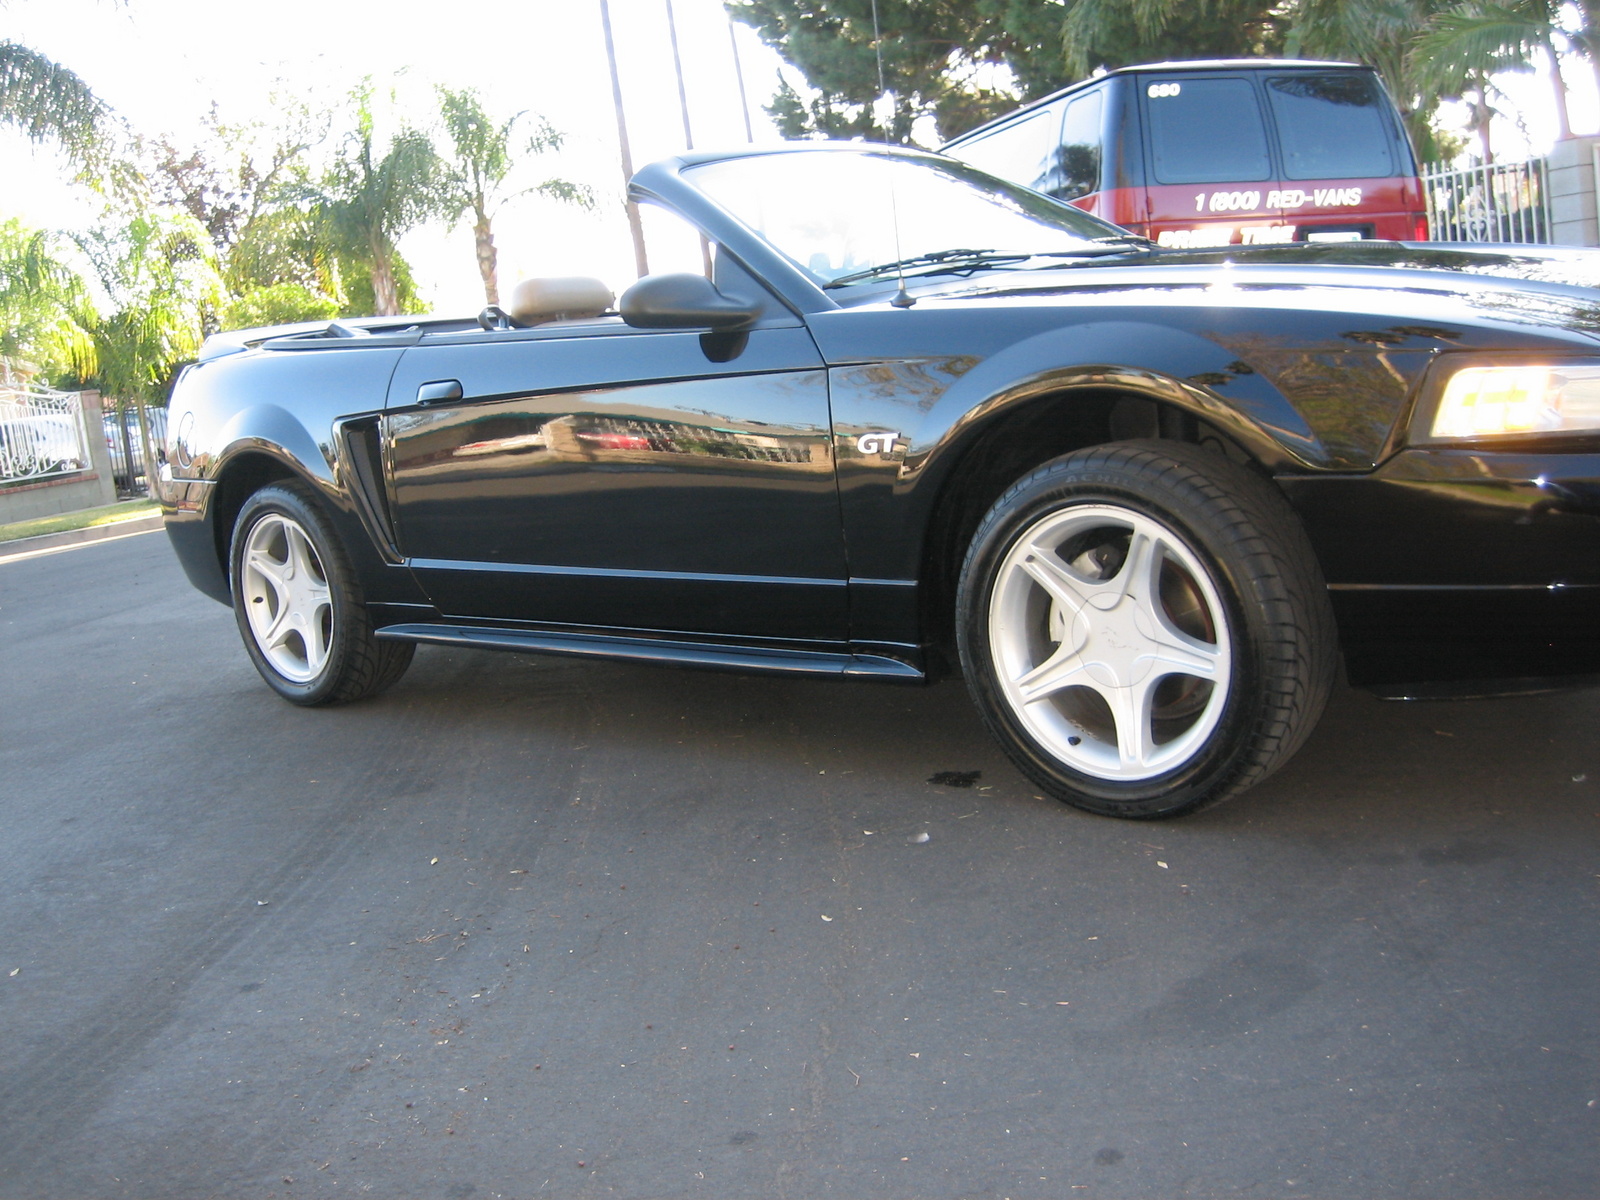 2000 Ford mustang gt convertible specifications #4